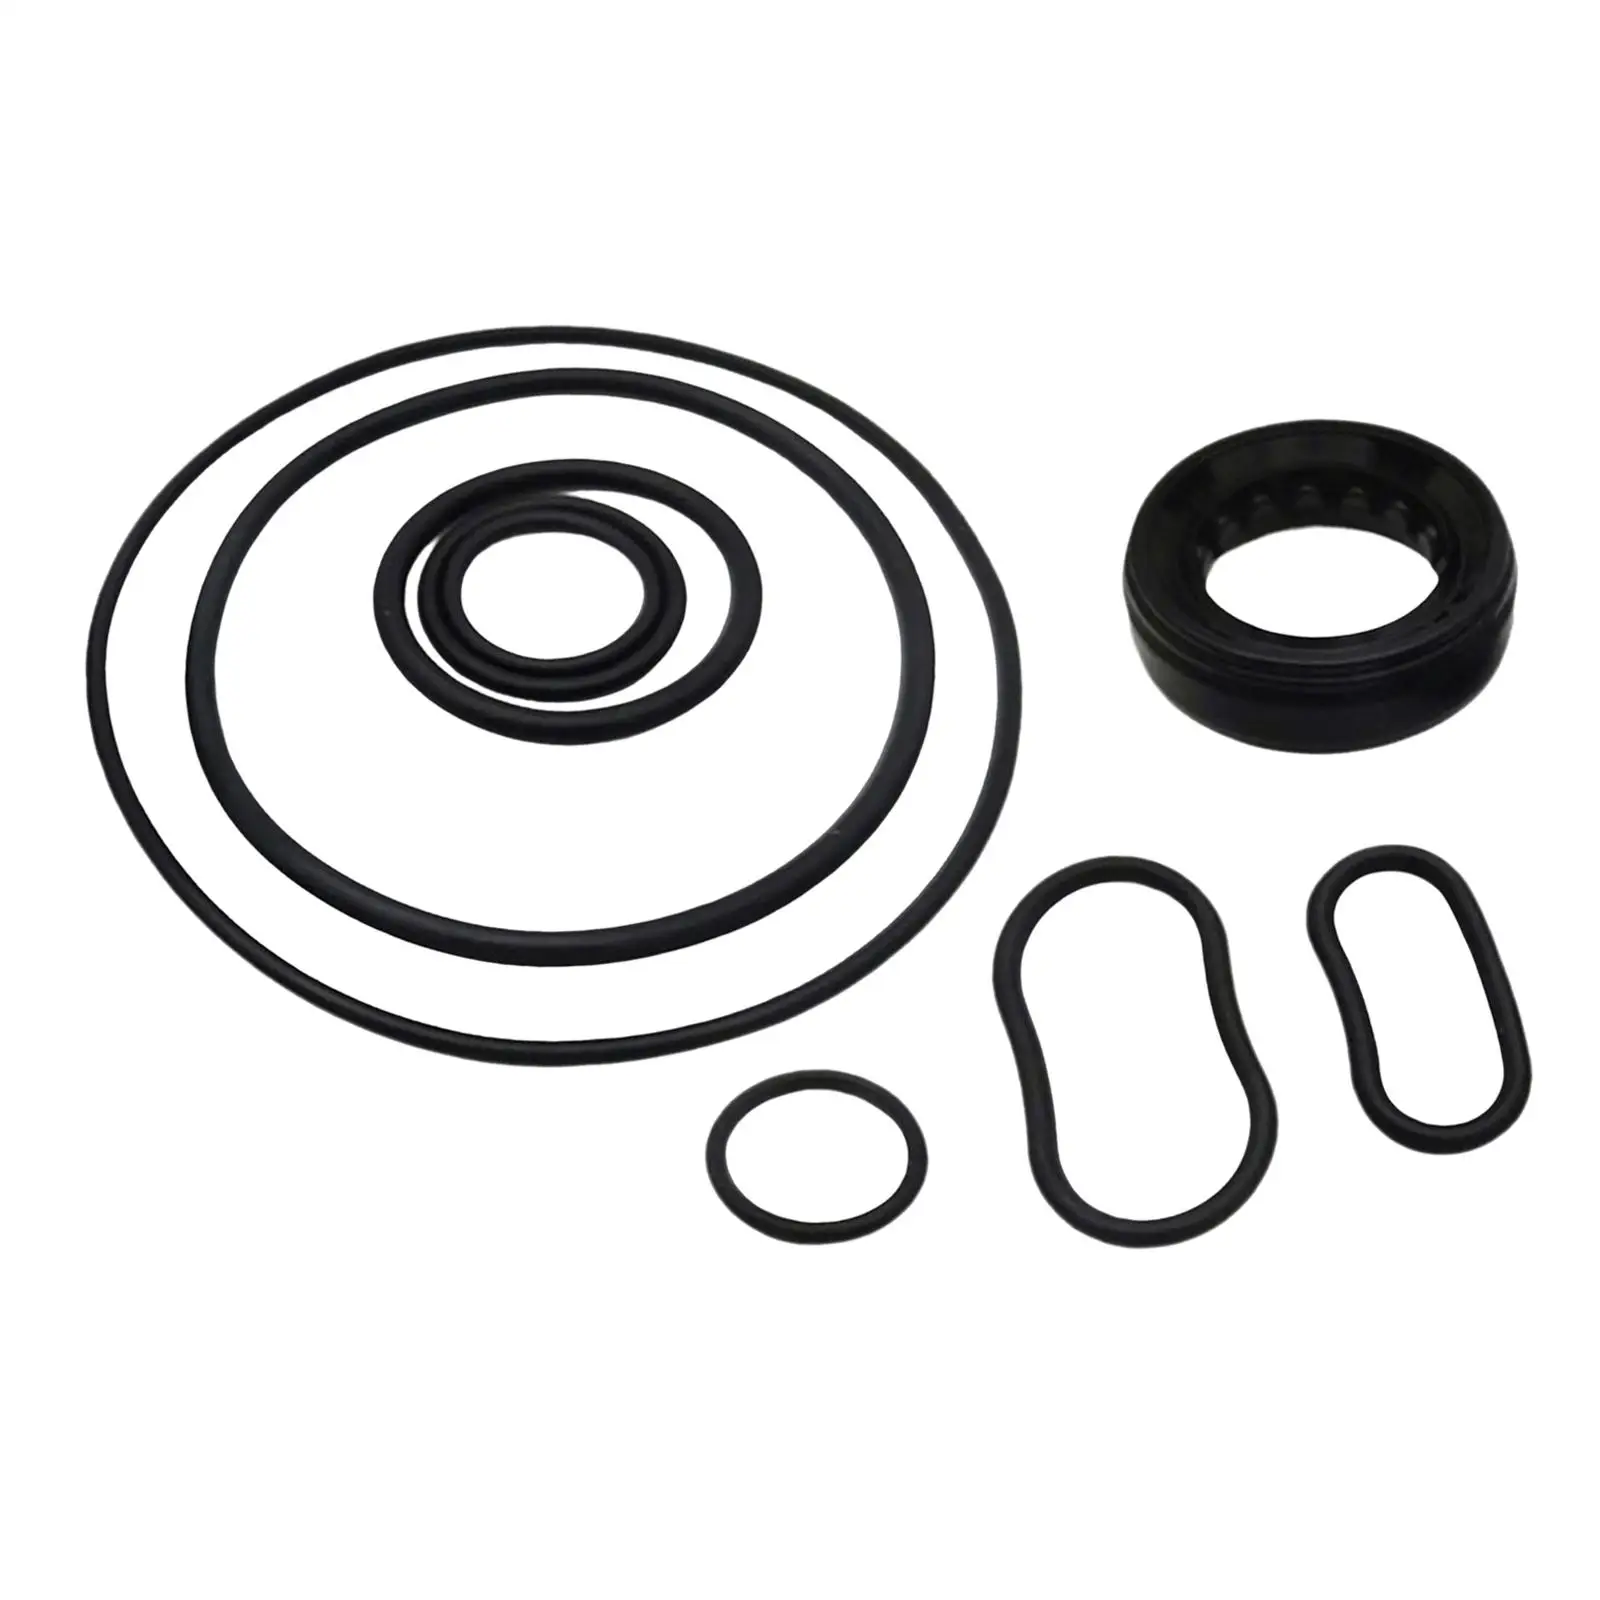 Power Steering Pump Seal Kit 06539-Pnc-003 Replacement Vehicle Professional Auto with O Rings for   2003-2007